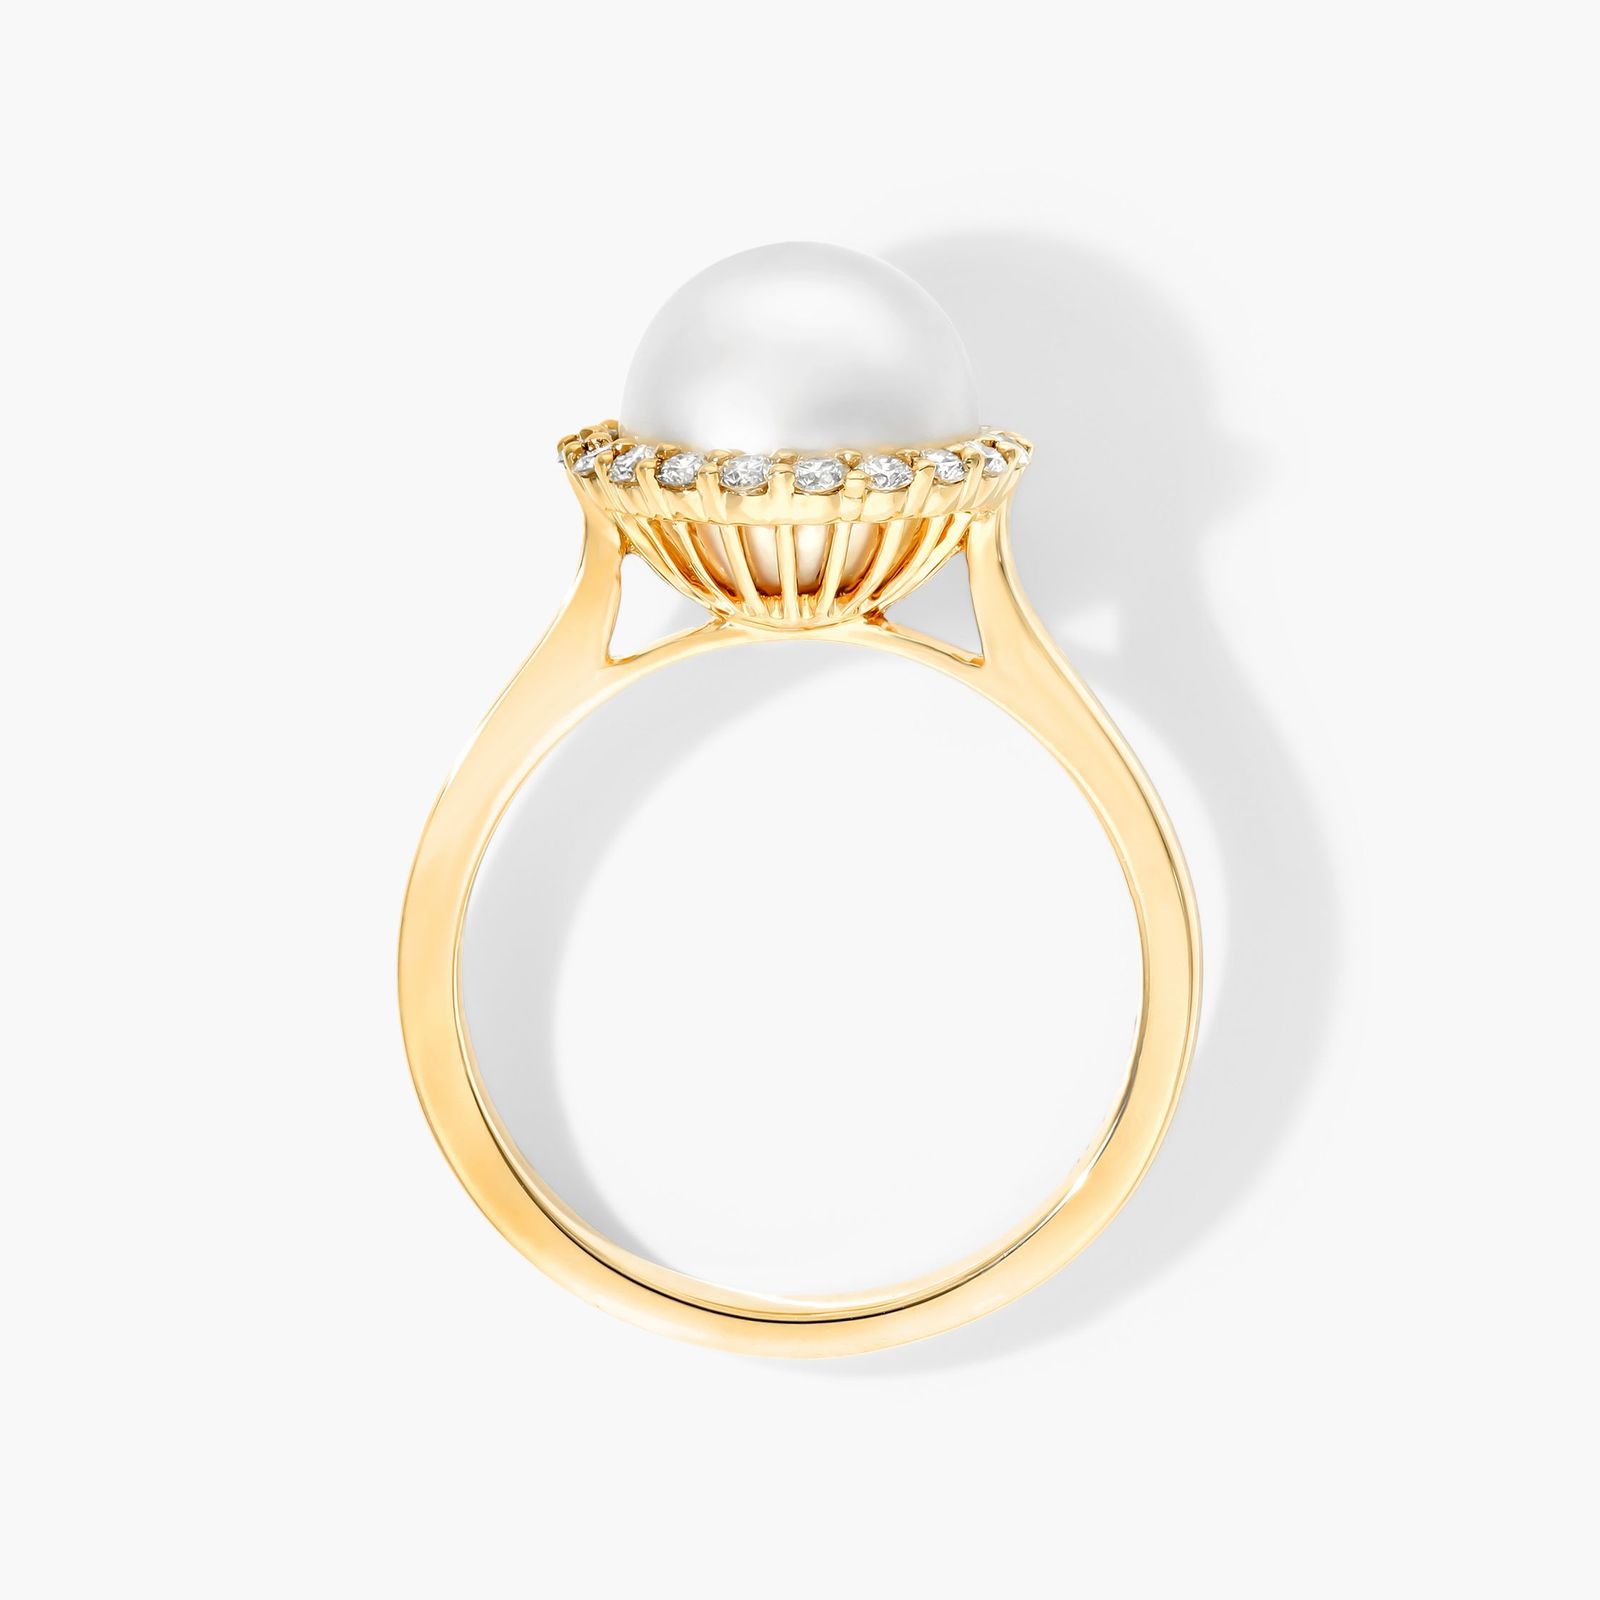 Pearls and diamonds cluster ring, alternative engagement ring, 14K gol –  Lily & Dahlia